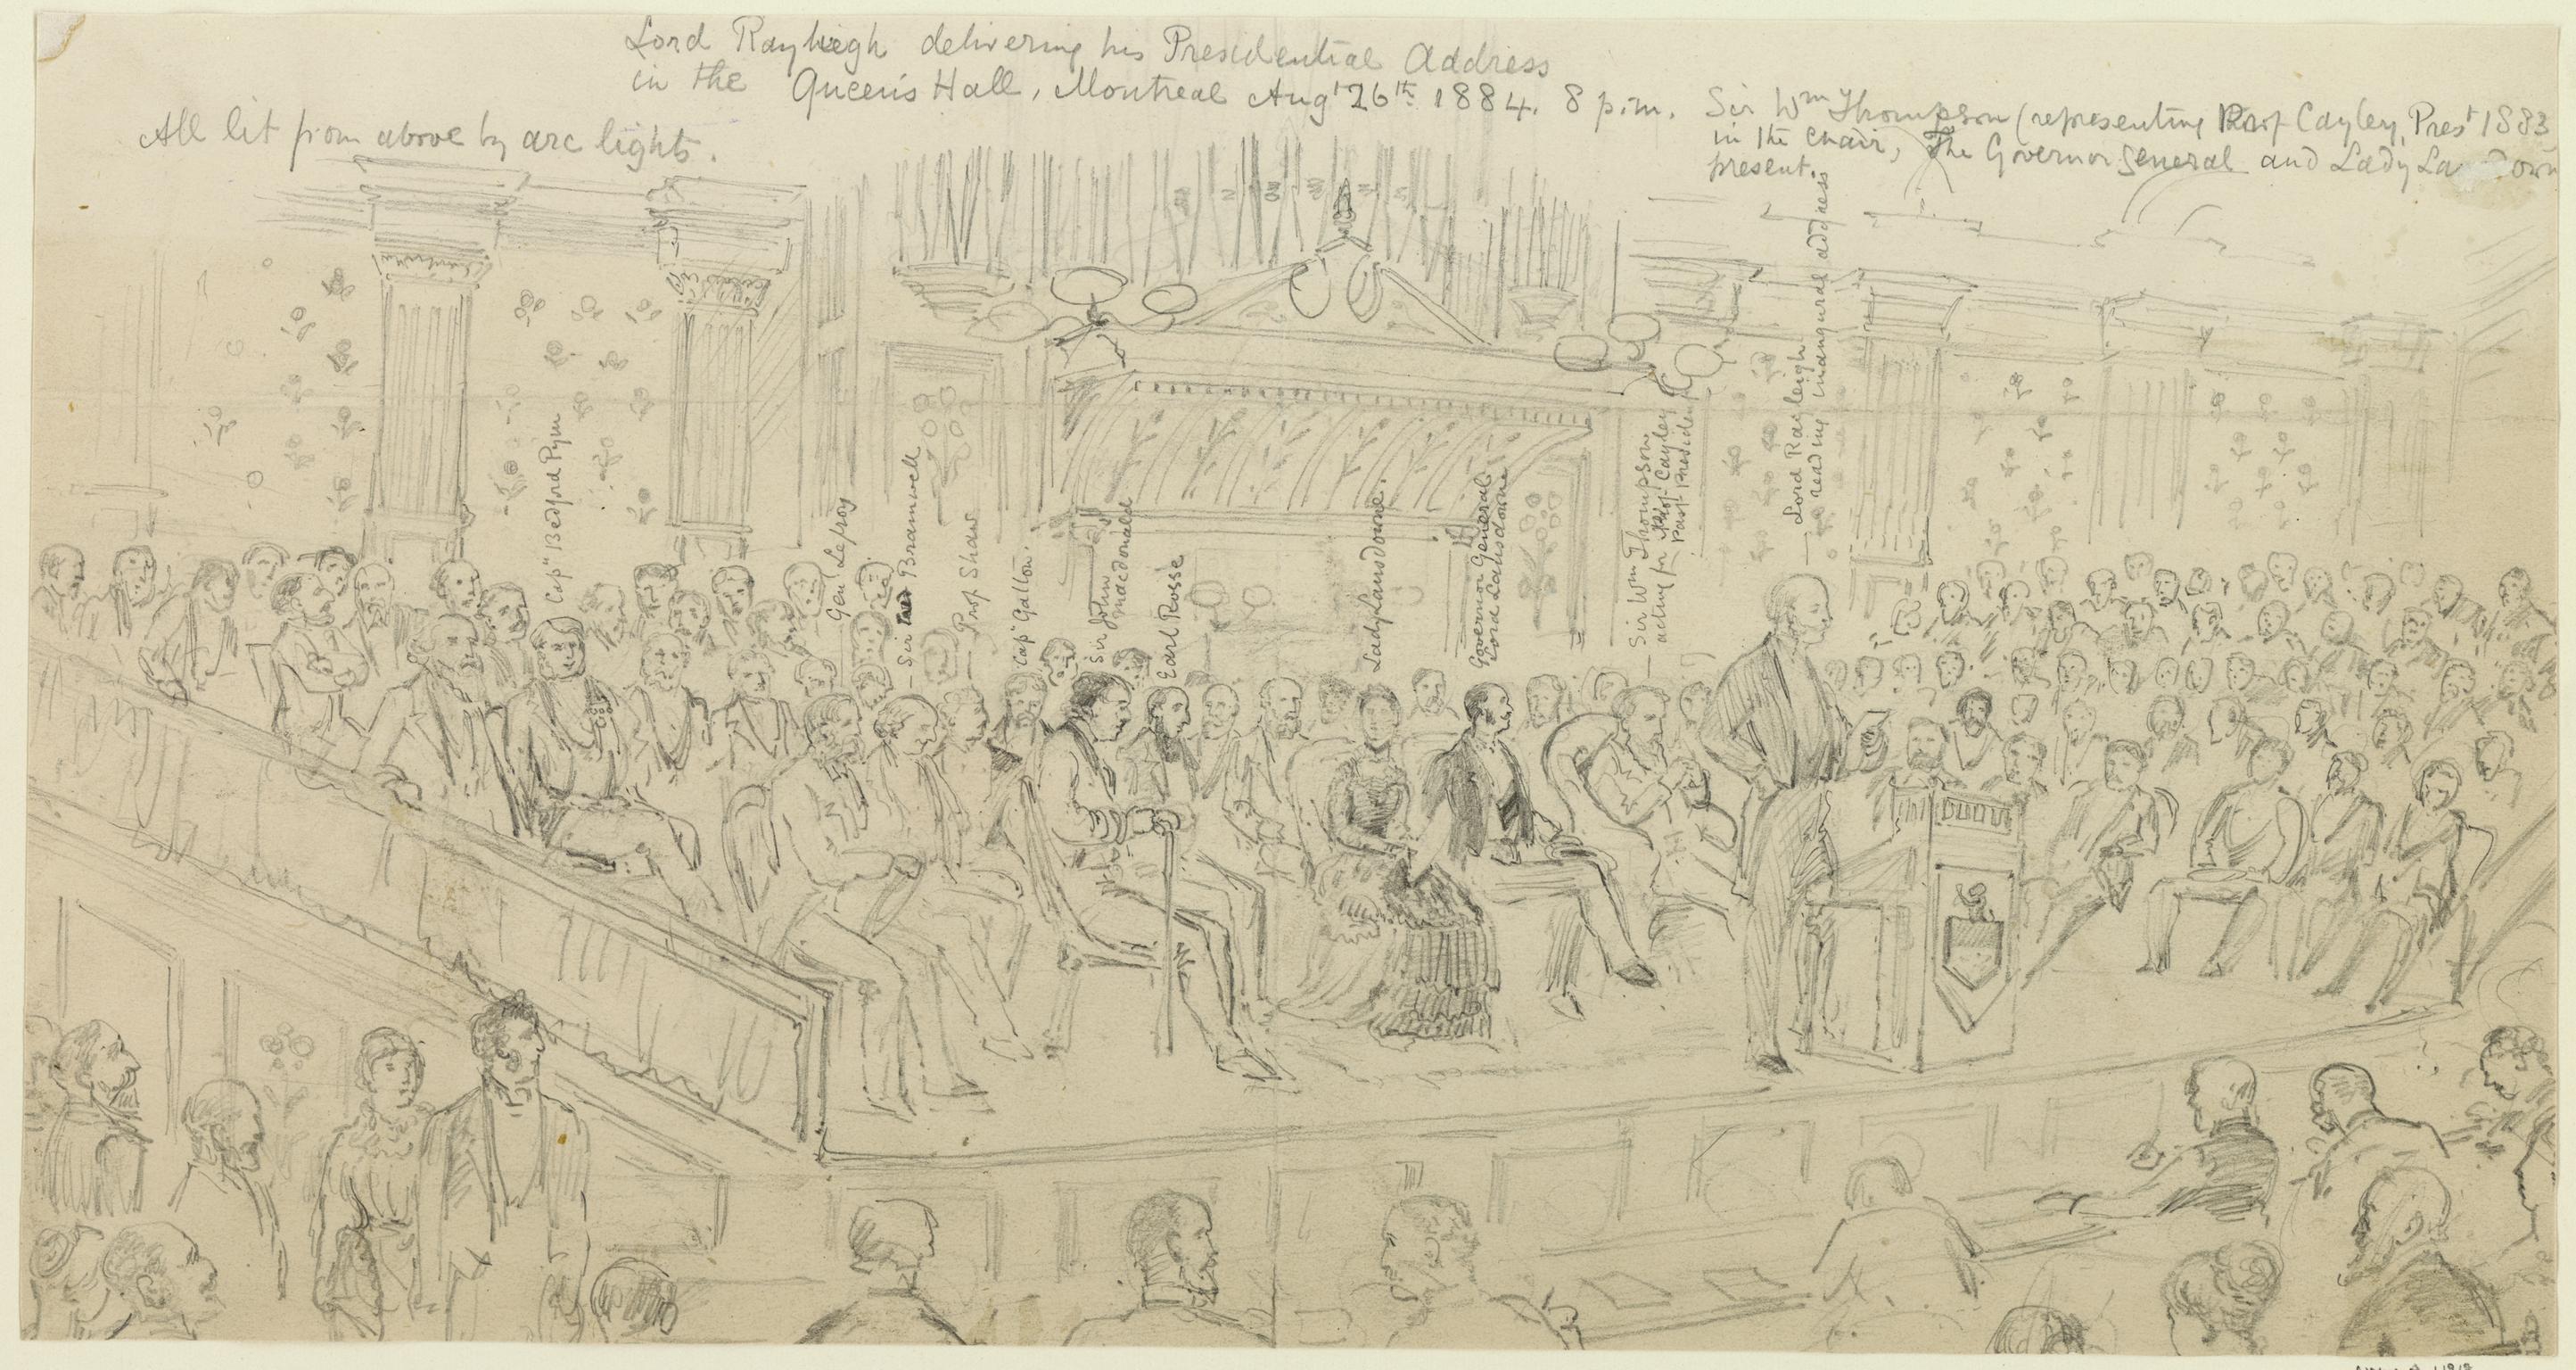 Lord Rayleigh delivering the Presidential address in the Queen's Hall, Montreal